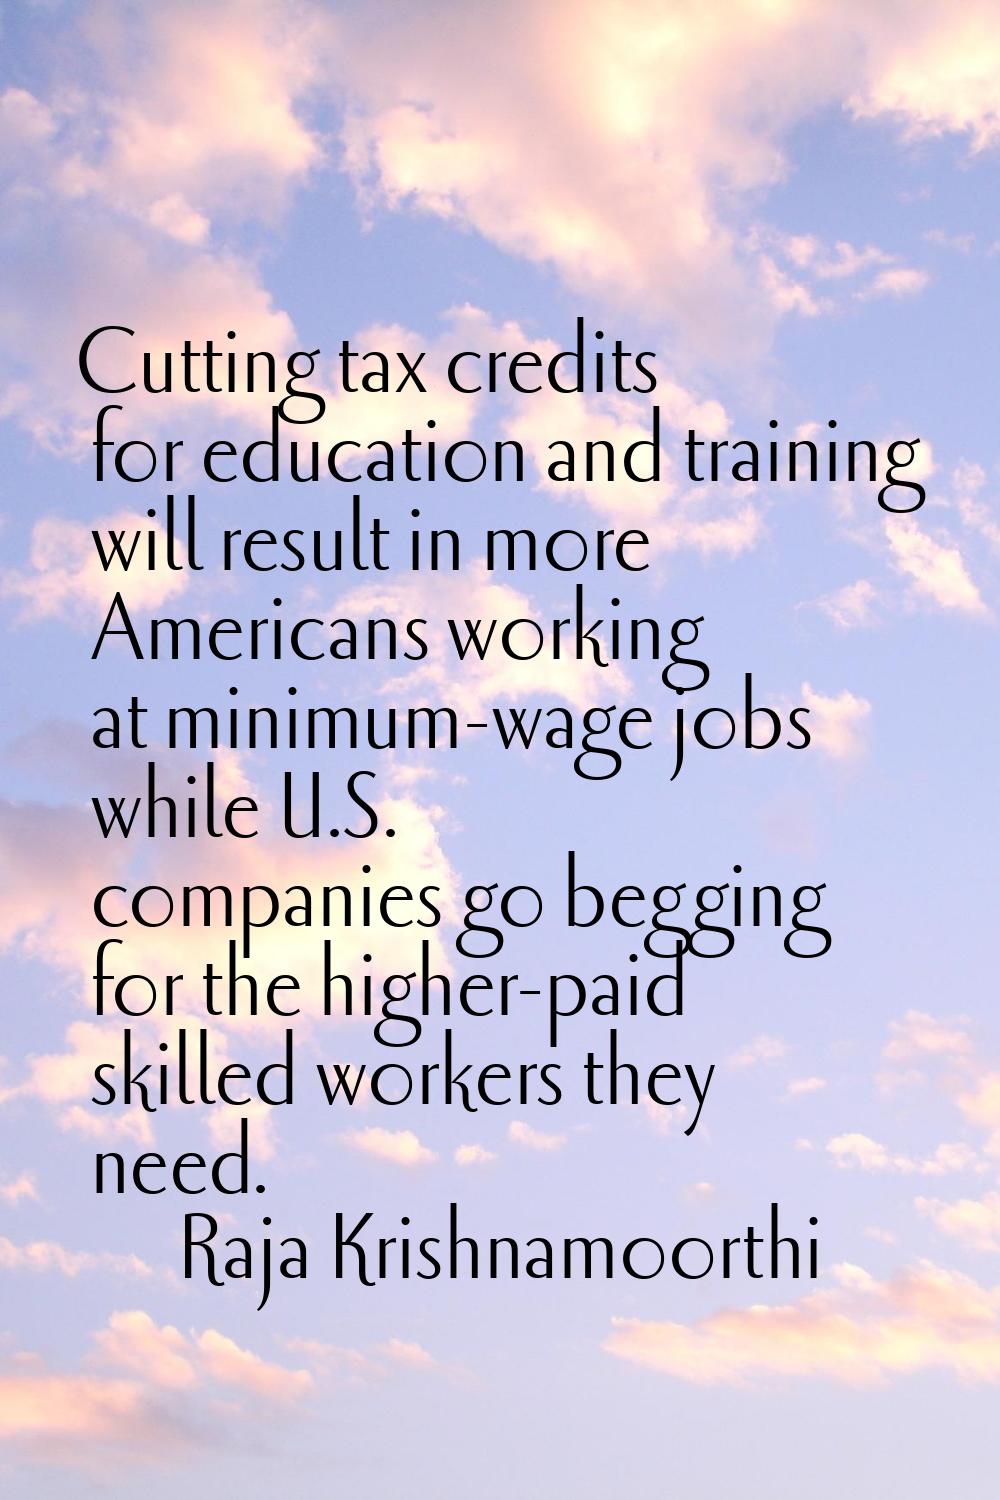 Cutting tax credits for education and training will result in more Americans working at minimum-wag